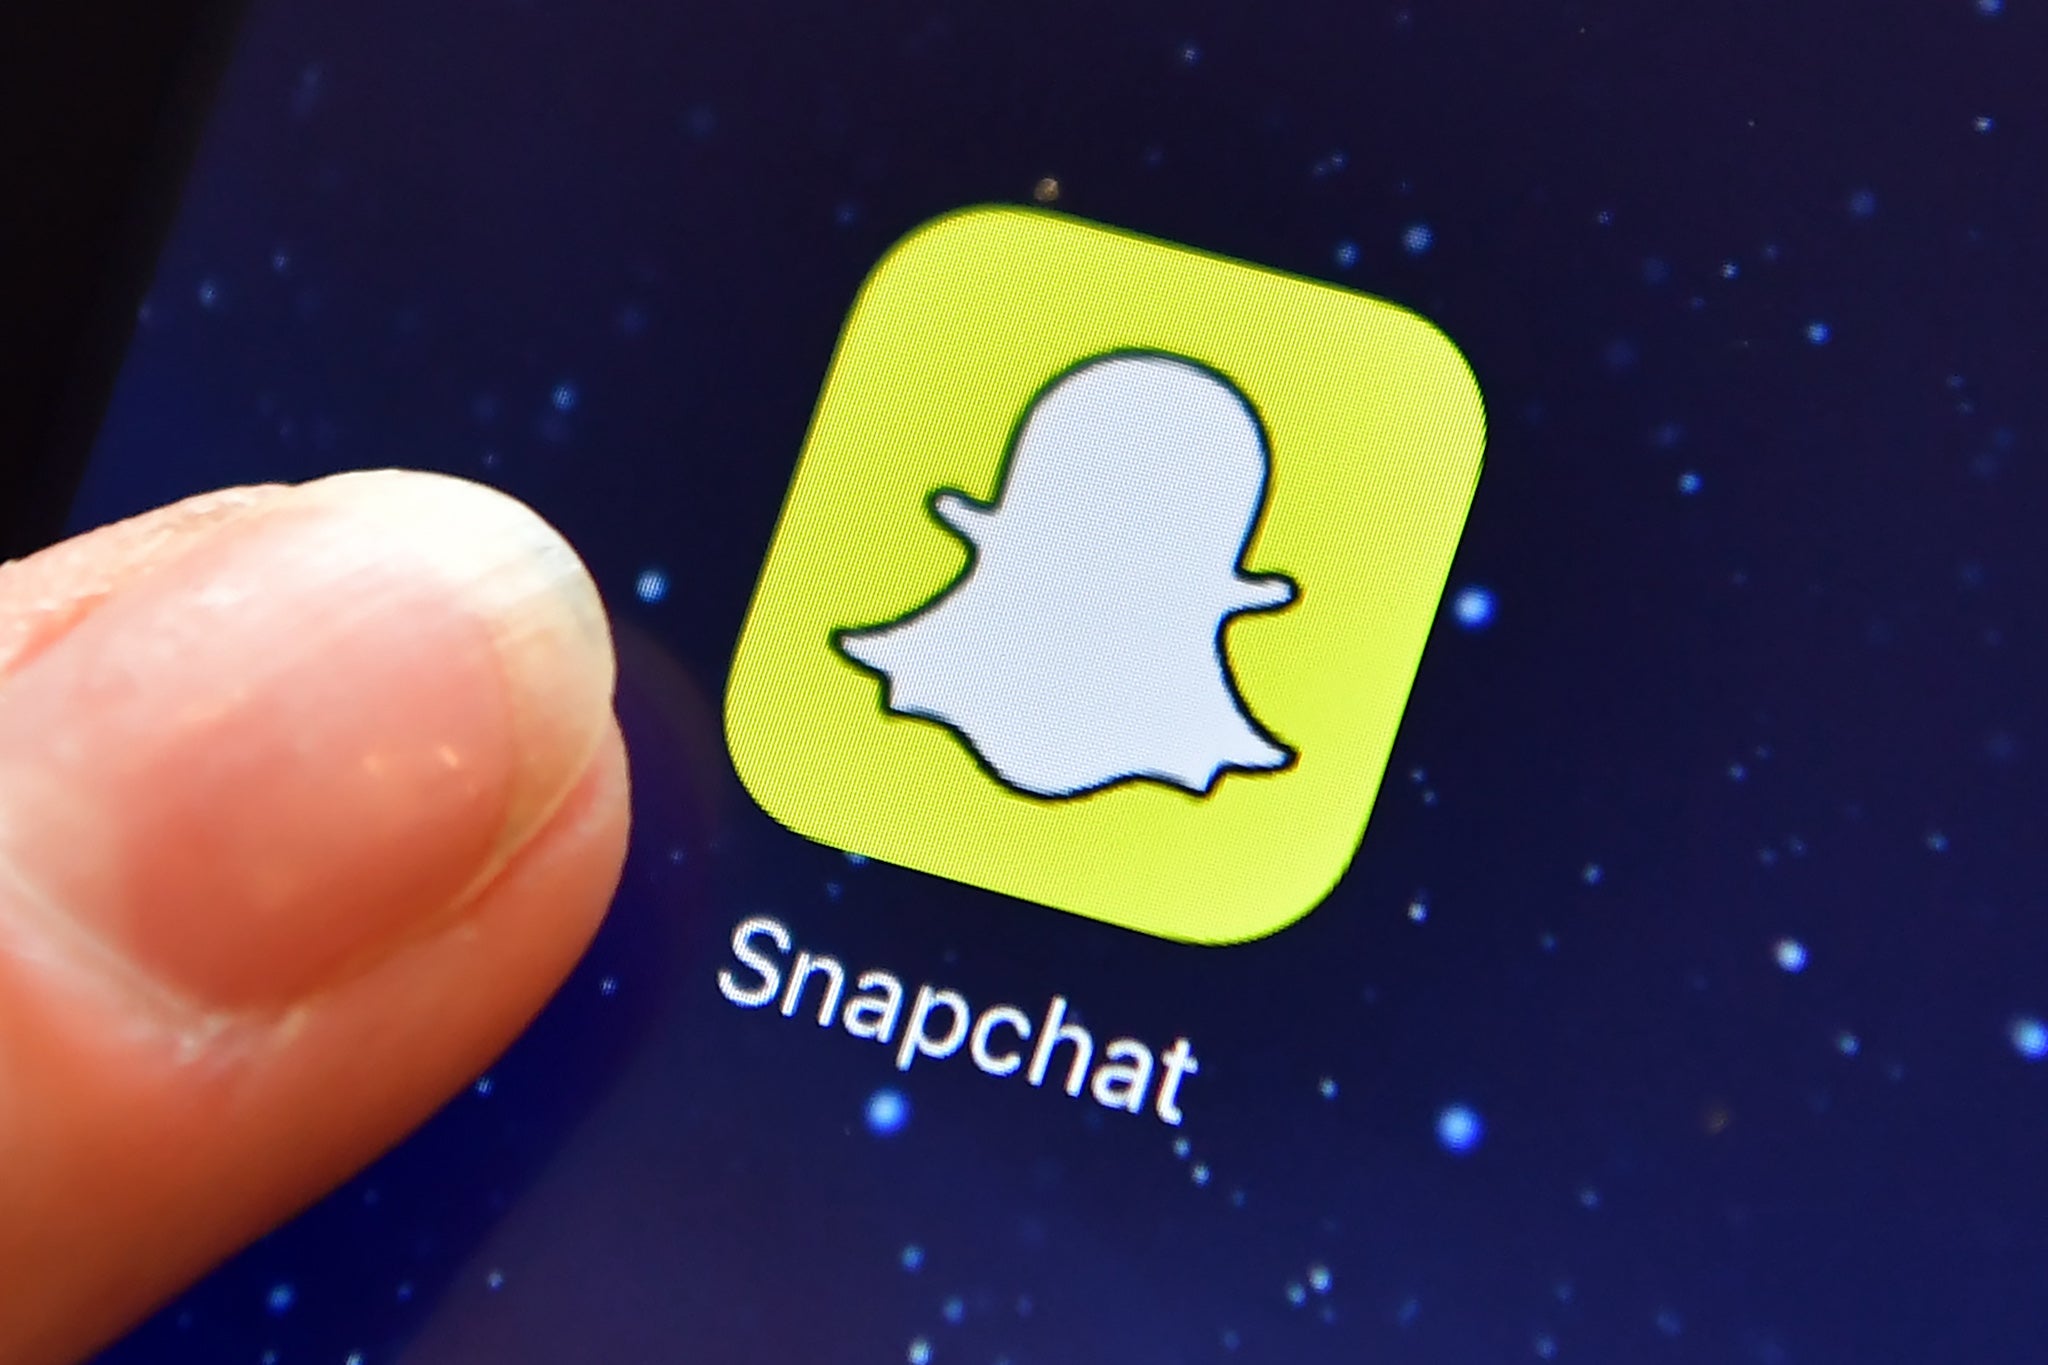 Snapchat launches new 'Spotlight' feature in attempt to take